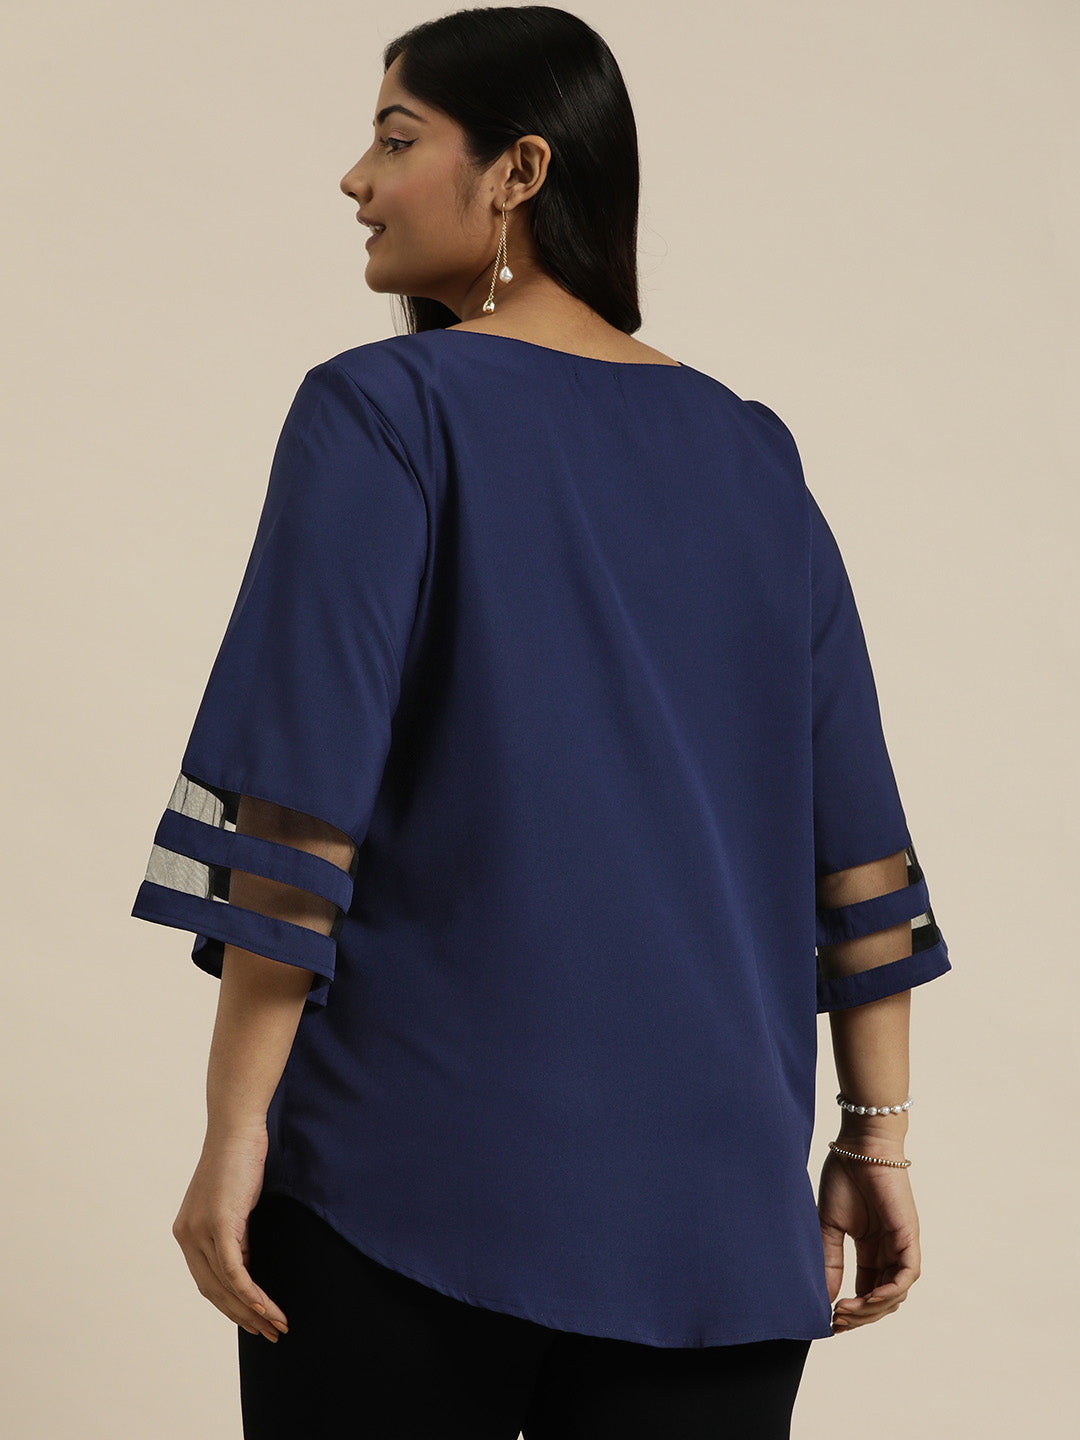 Navy blue Top With stylish Mesh Bell Sleeves